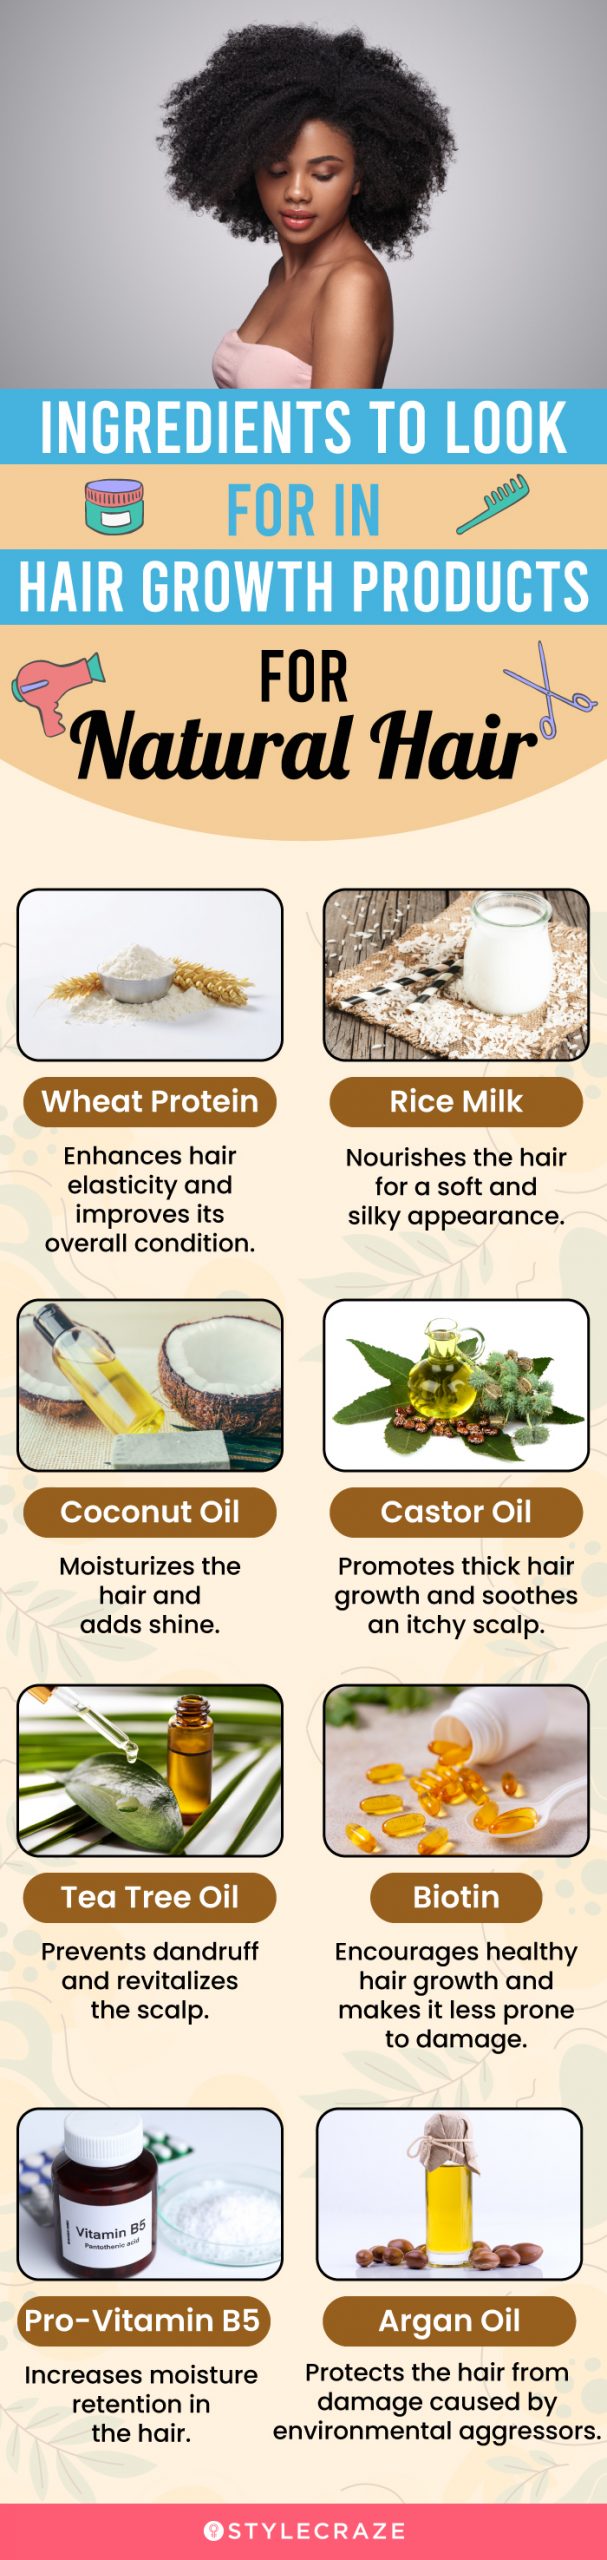 Ingredients To Look For In Hair Growth Products For Black Hair (infographic)